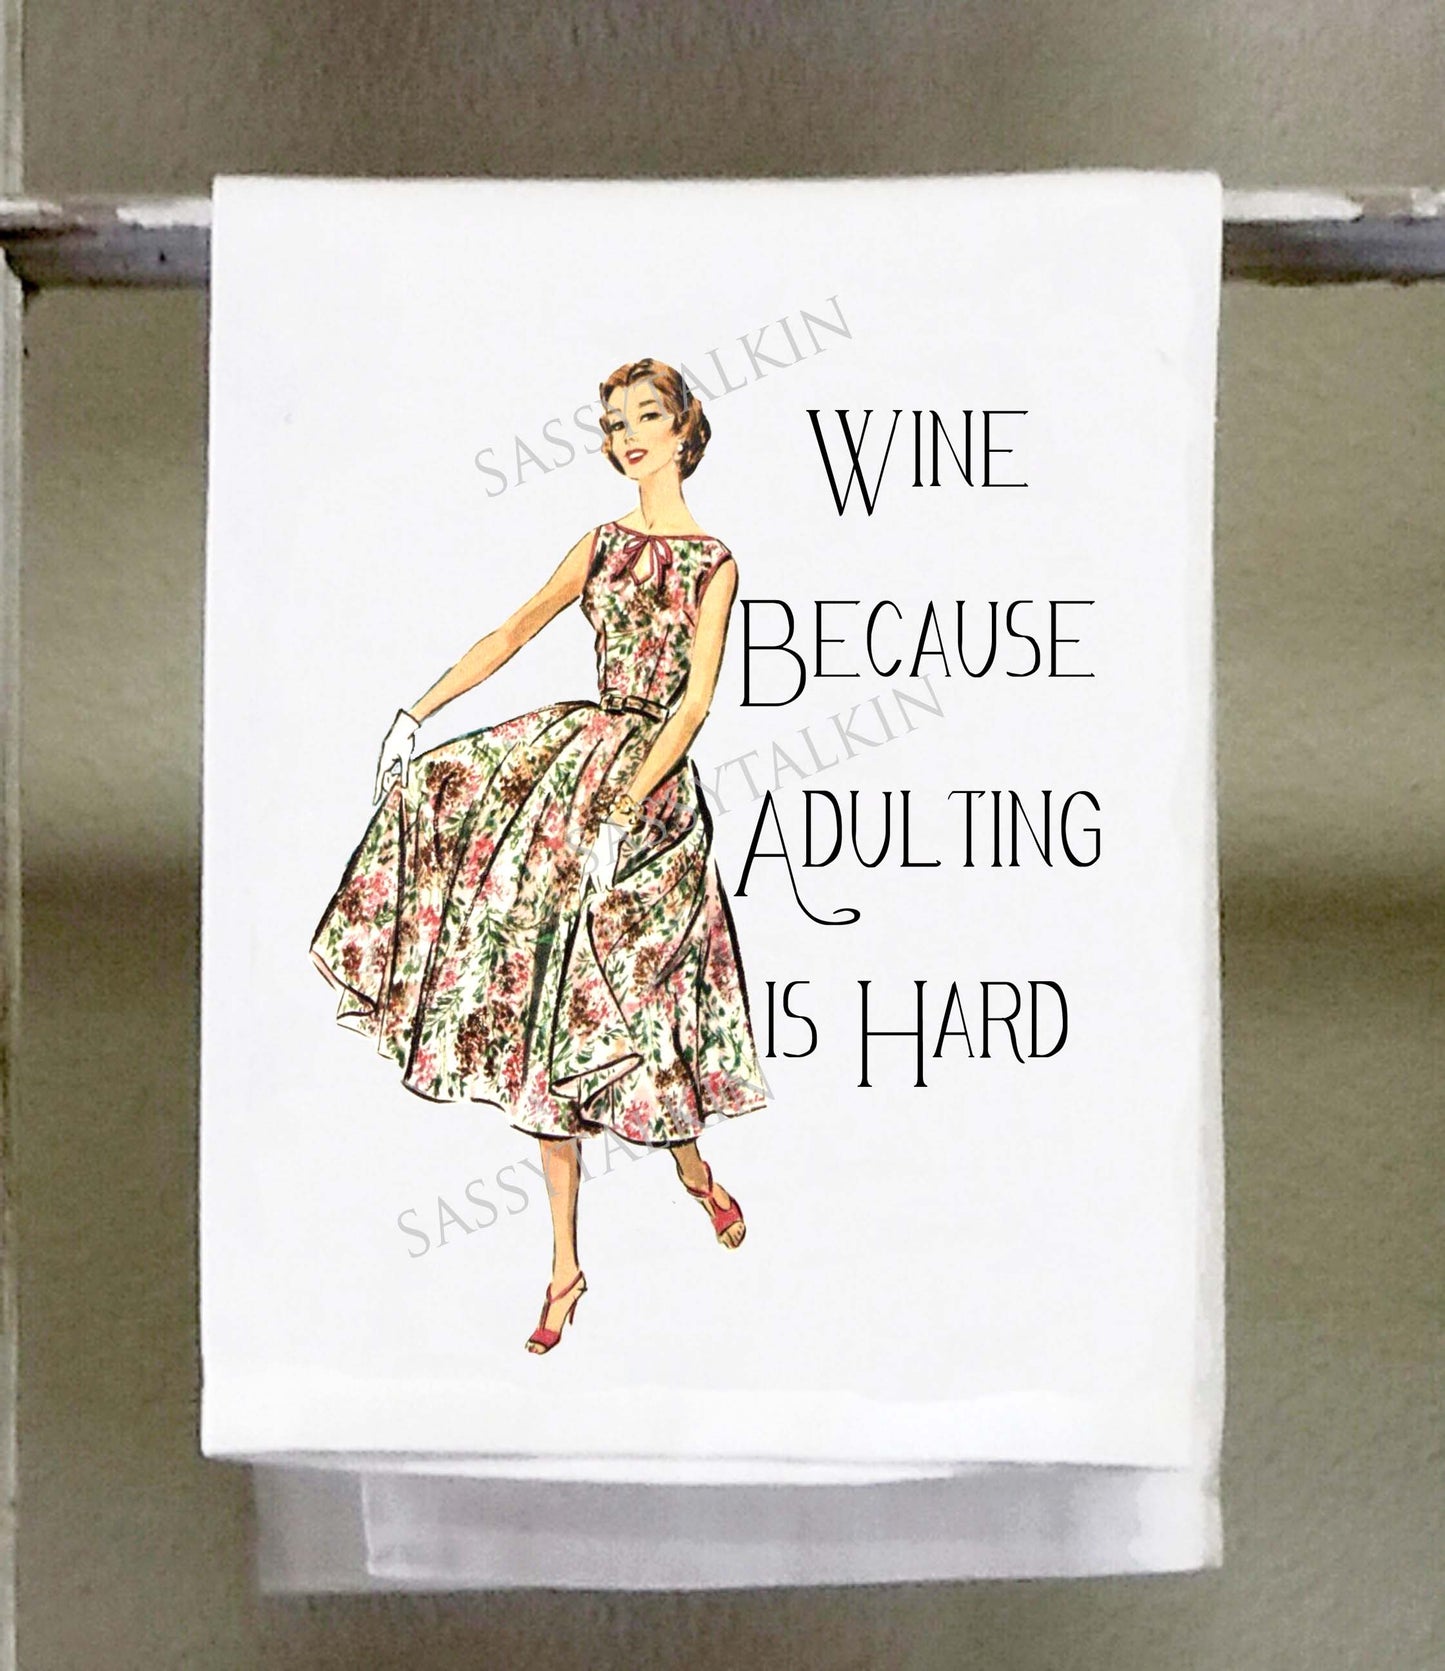 Sassy Girl, Wine because adulting is hard